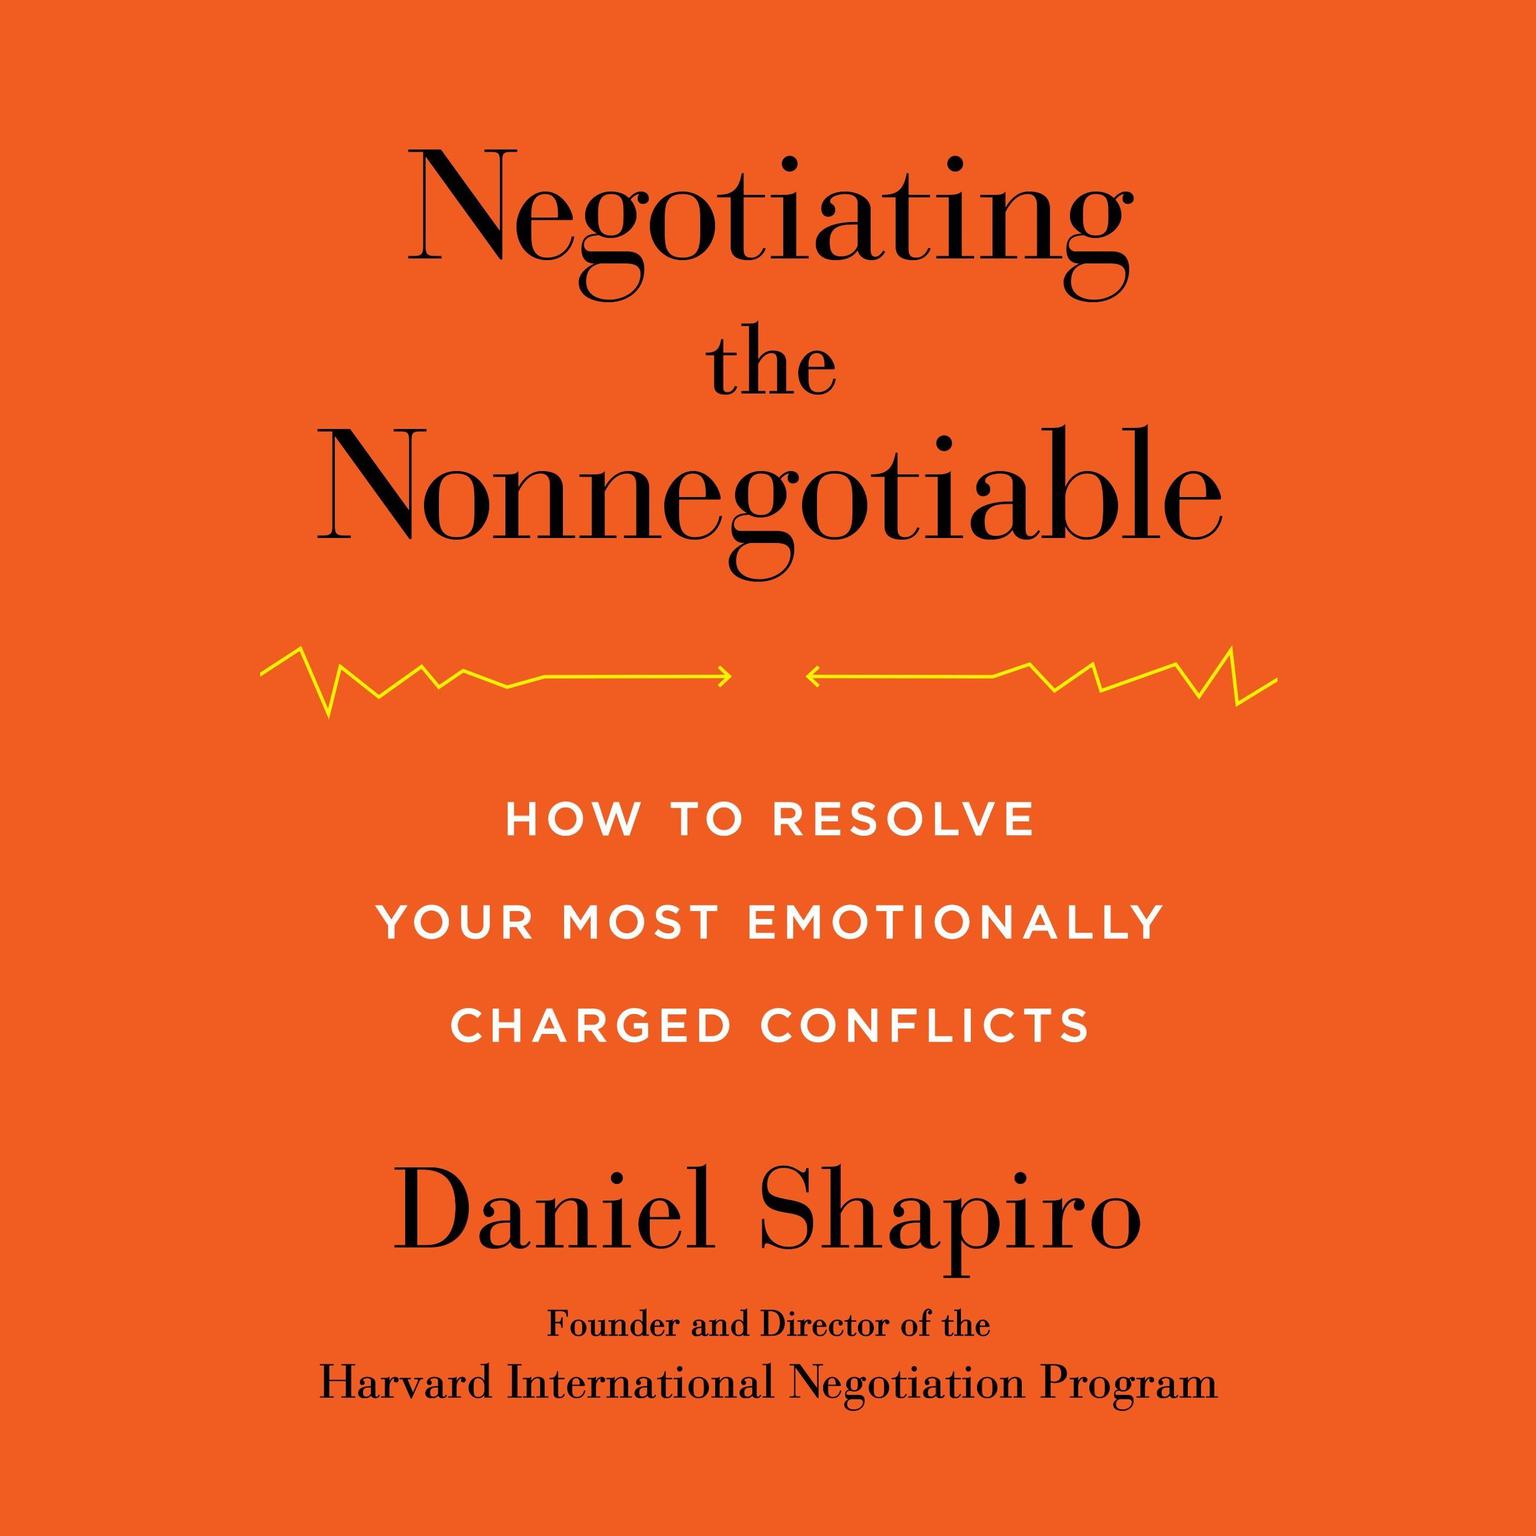 Negotiating the Nonnegotiable: How to Resolve Your Most Emotionally Charged Conflicts Audiobook, by Daniel Shapiro